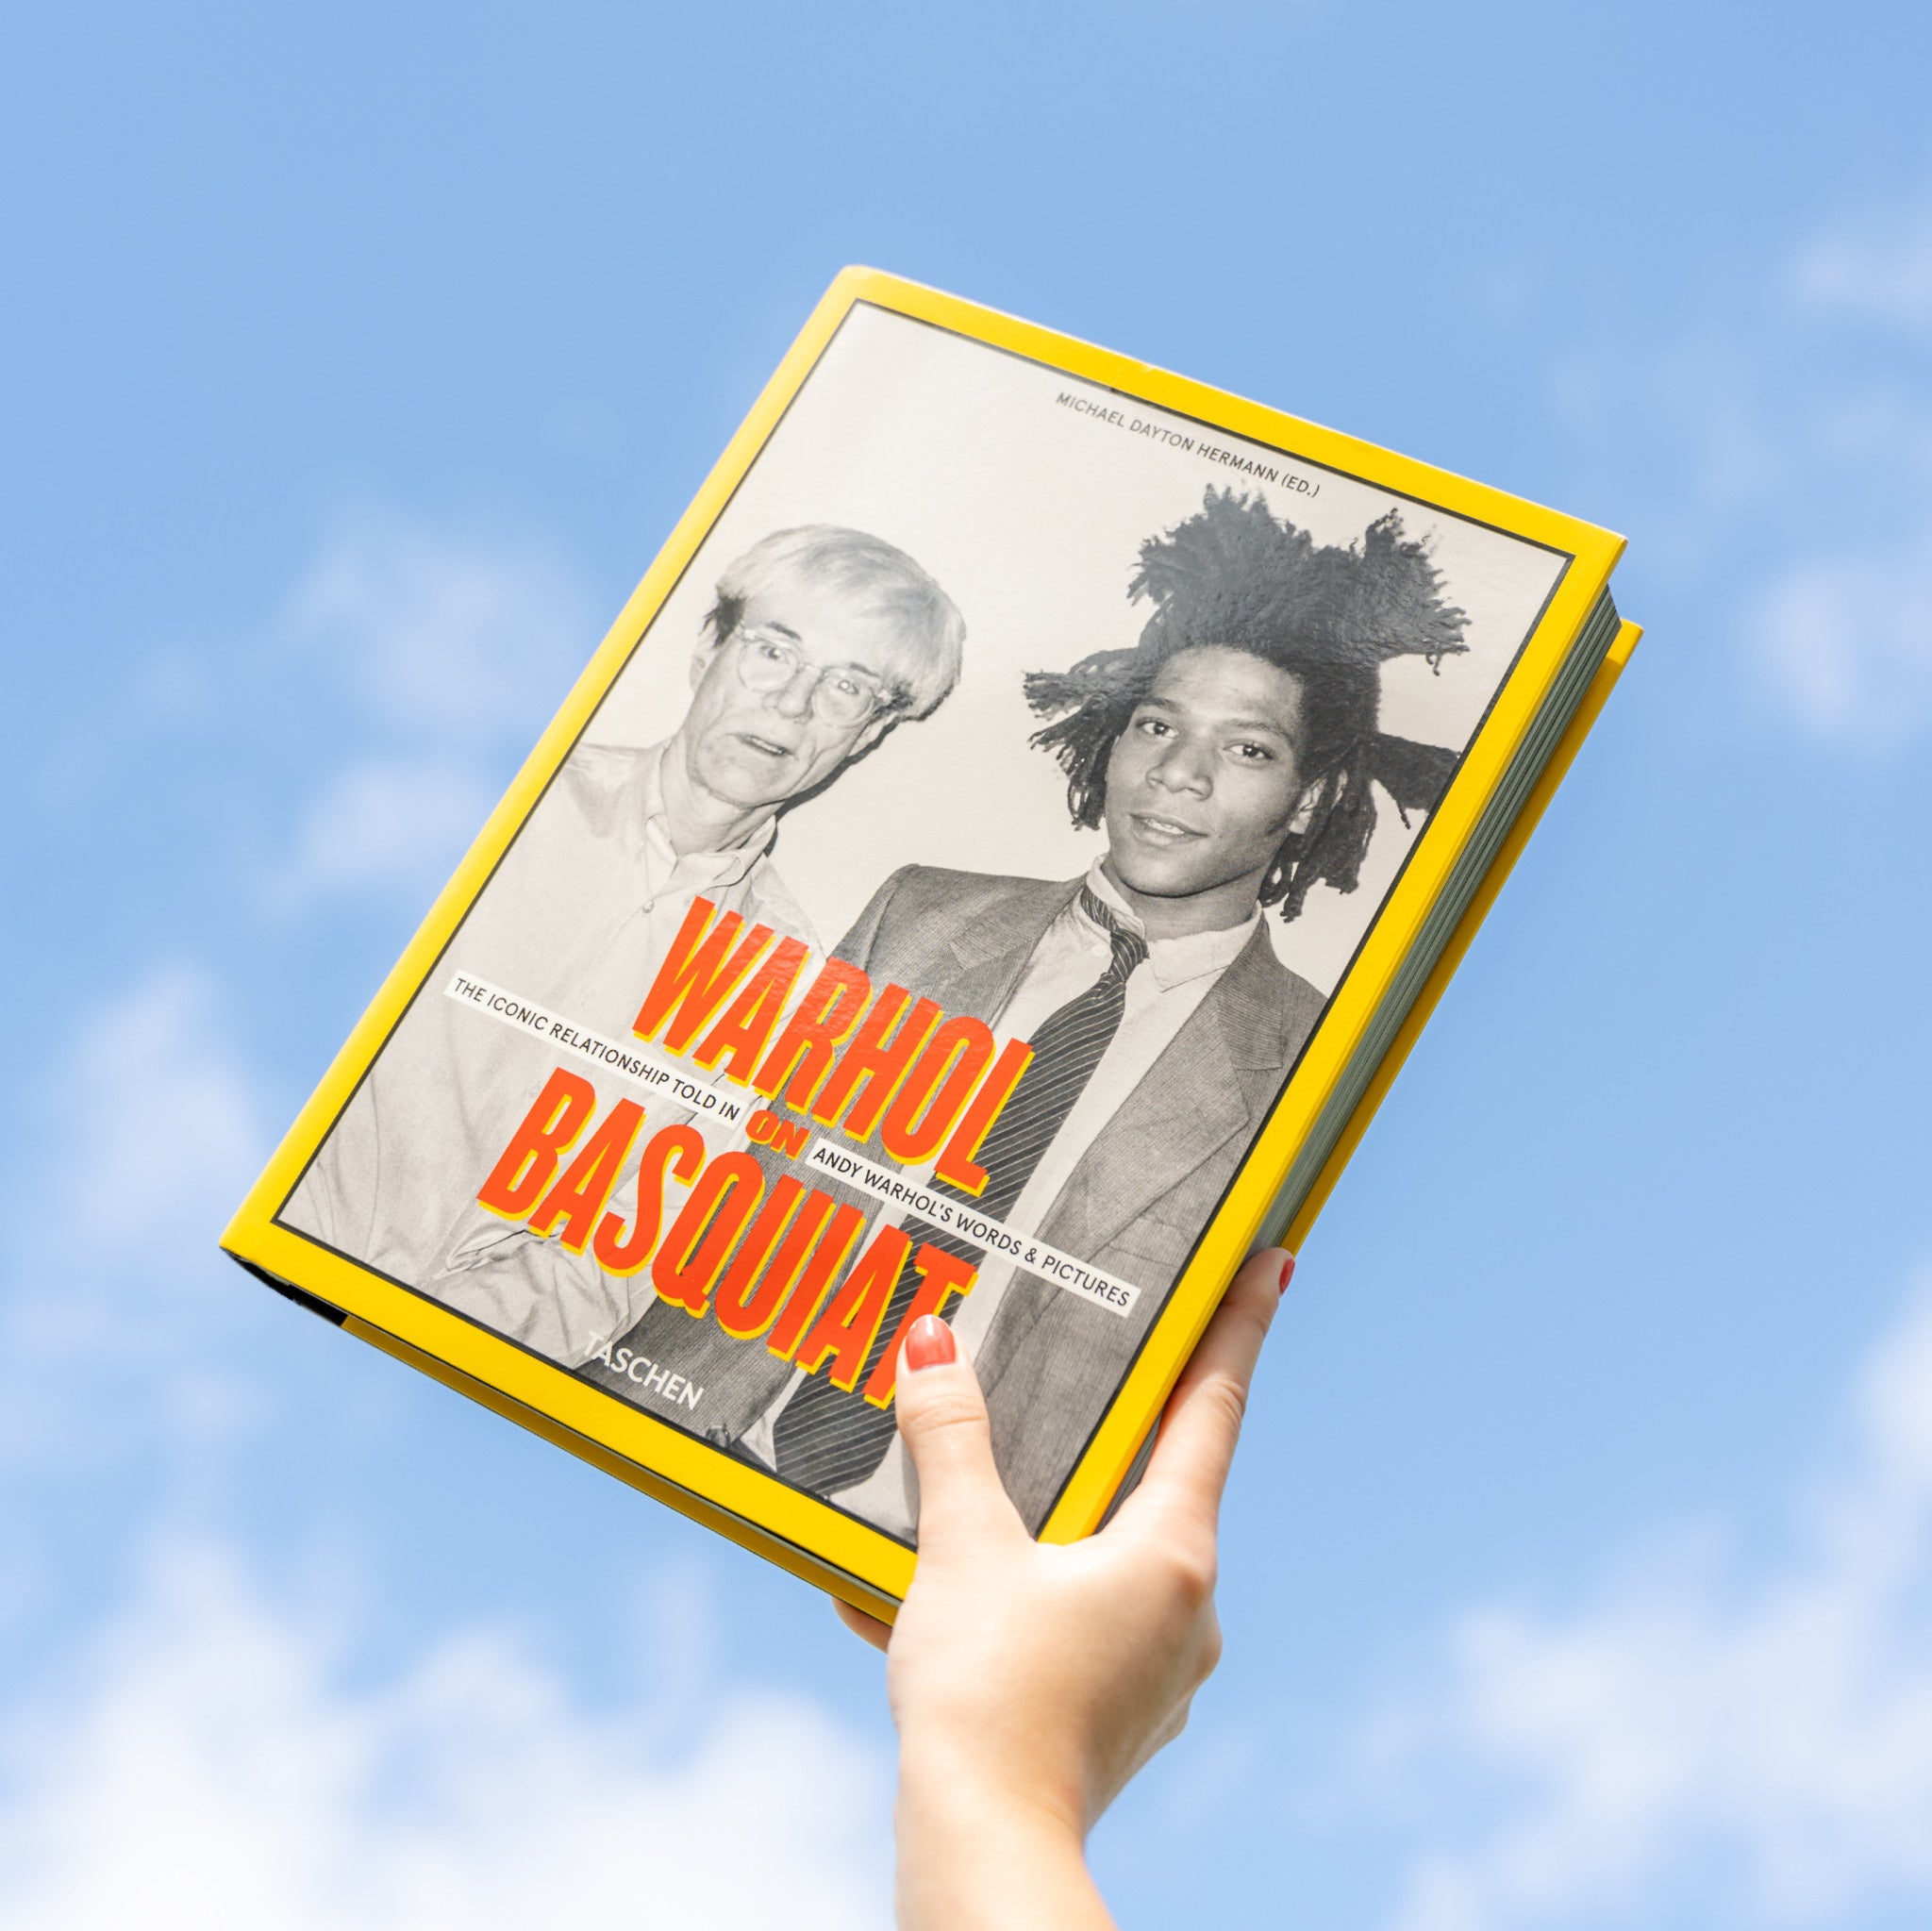 Warhol on Basquiat. the Iconic Relationship Told in Andy Warhol's Words and Pictures - Wynwood Walls Shop